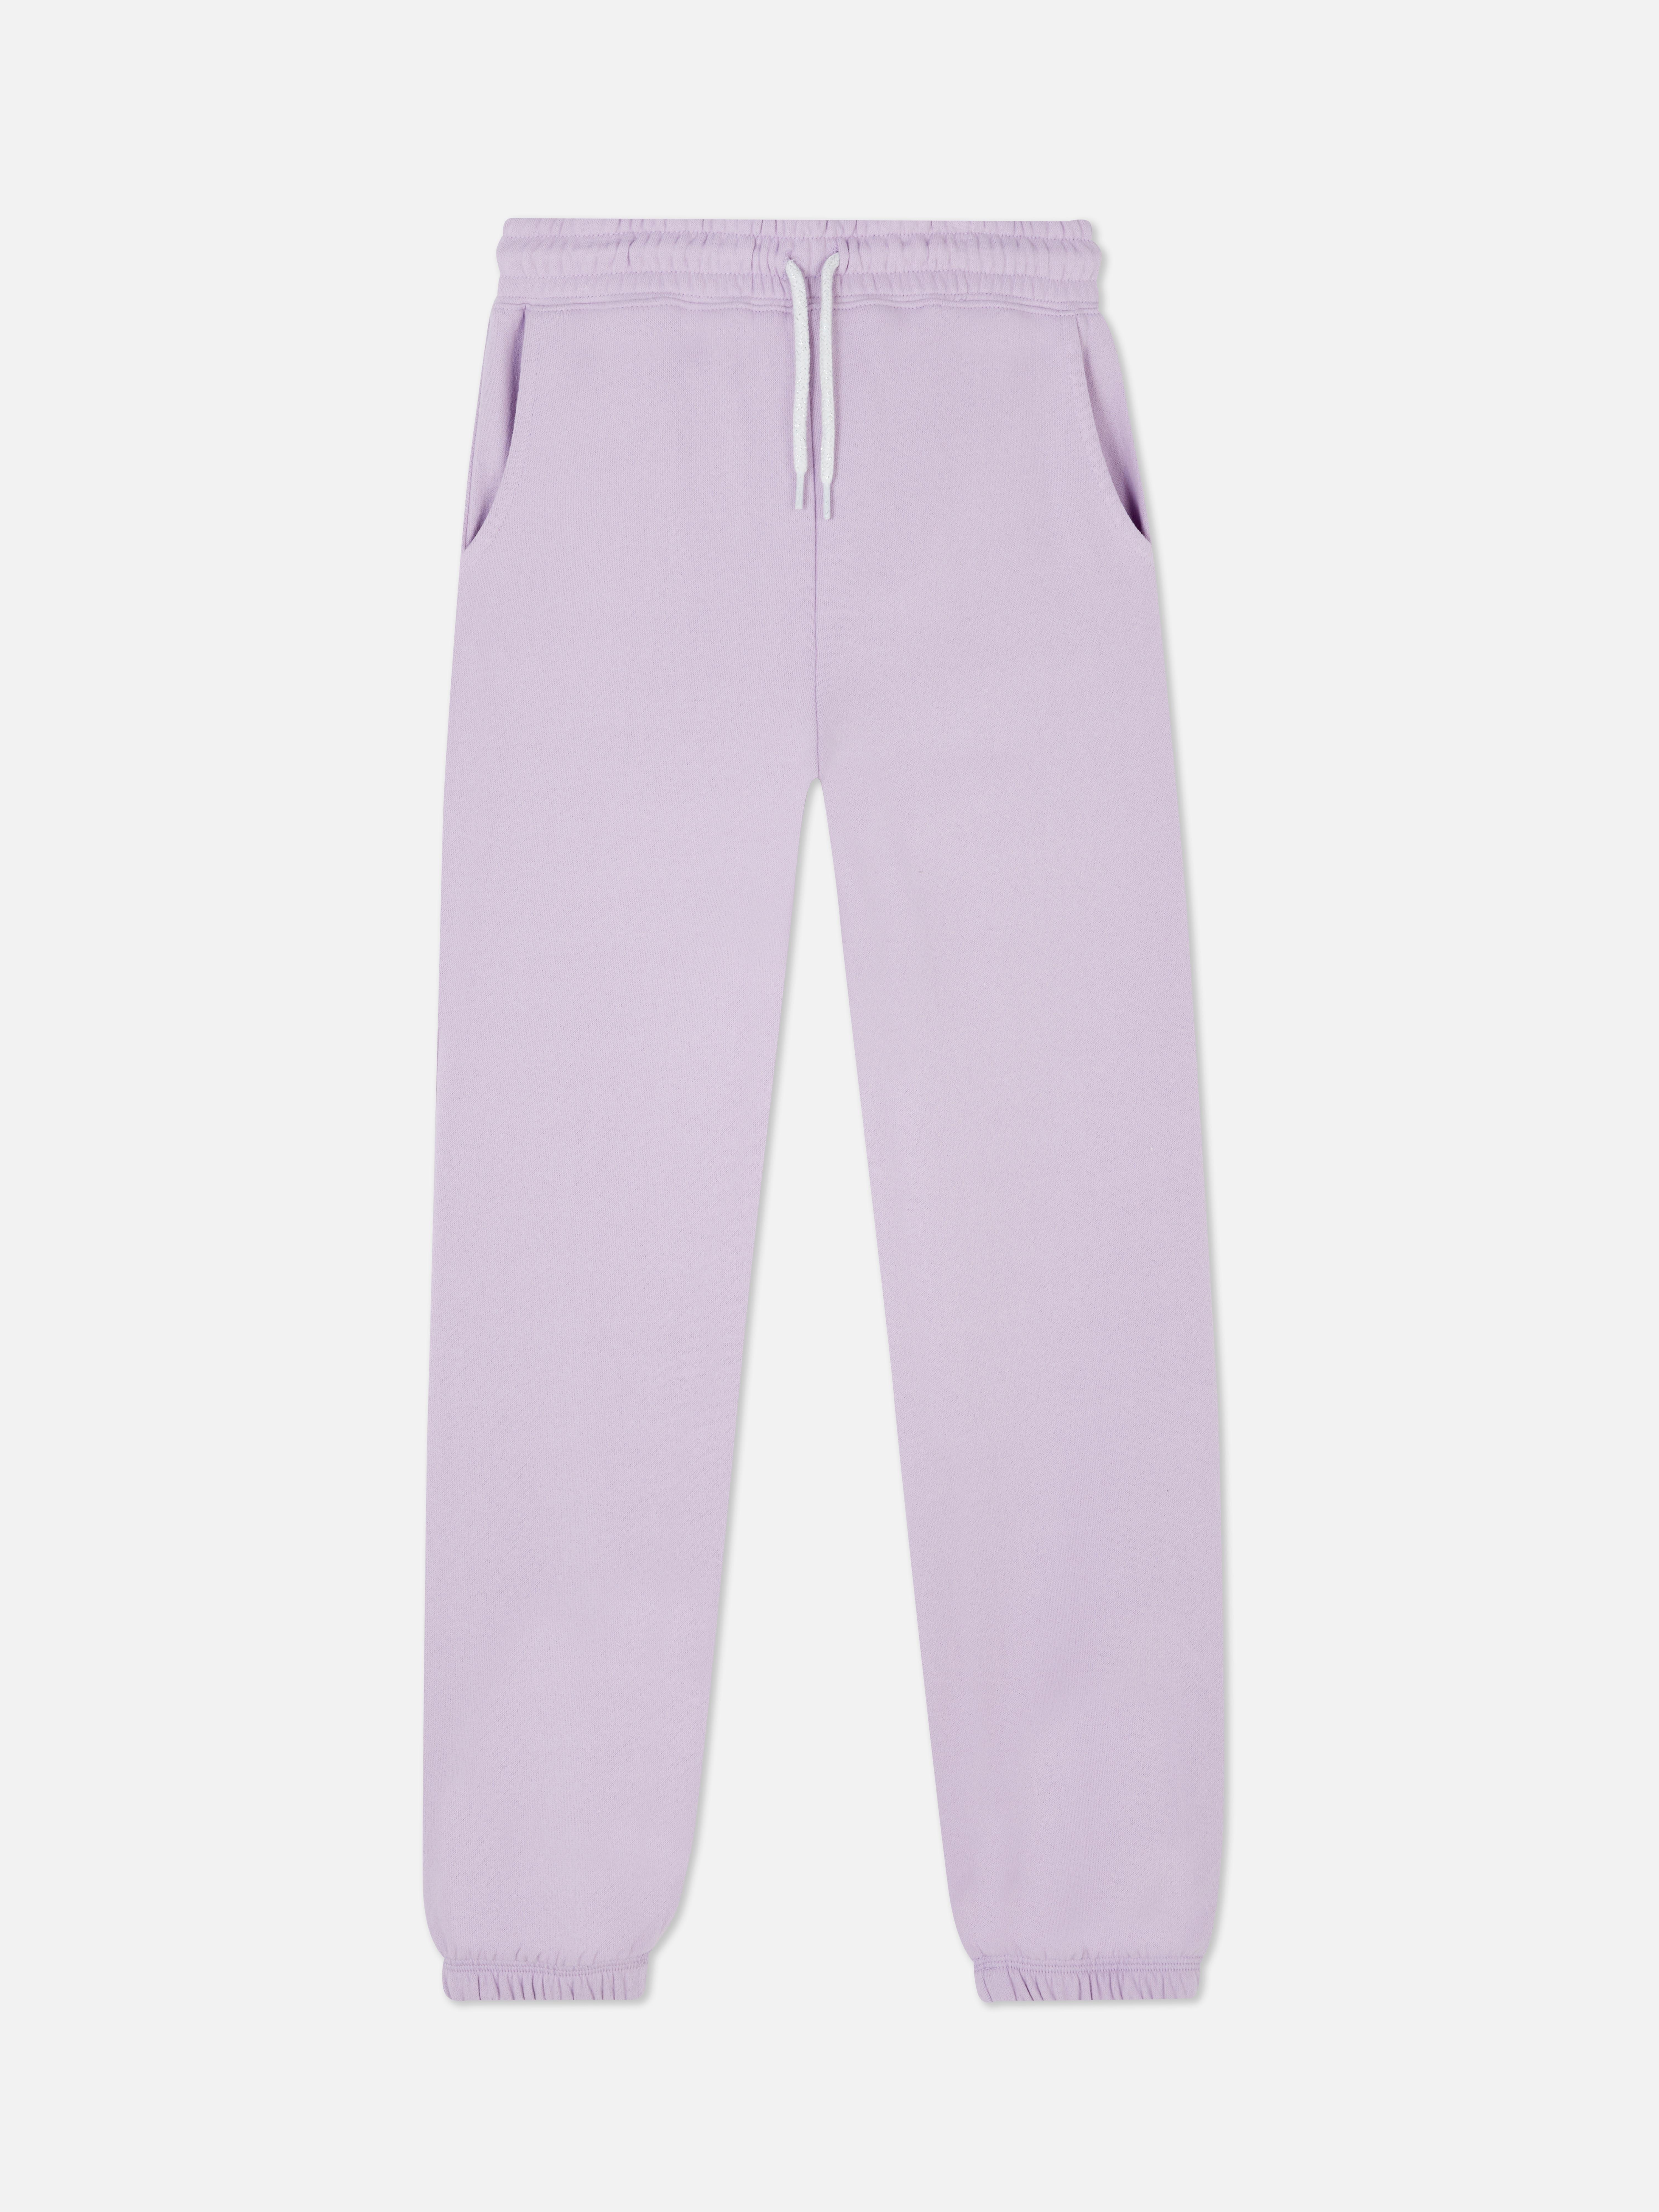 Relaxed Jogging Bottoms